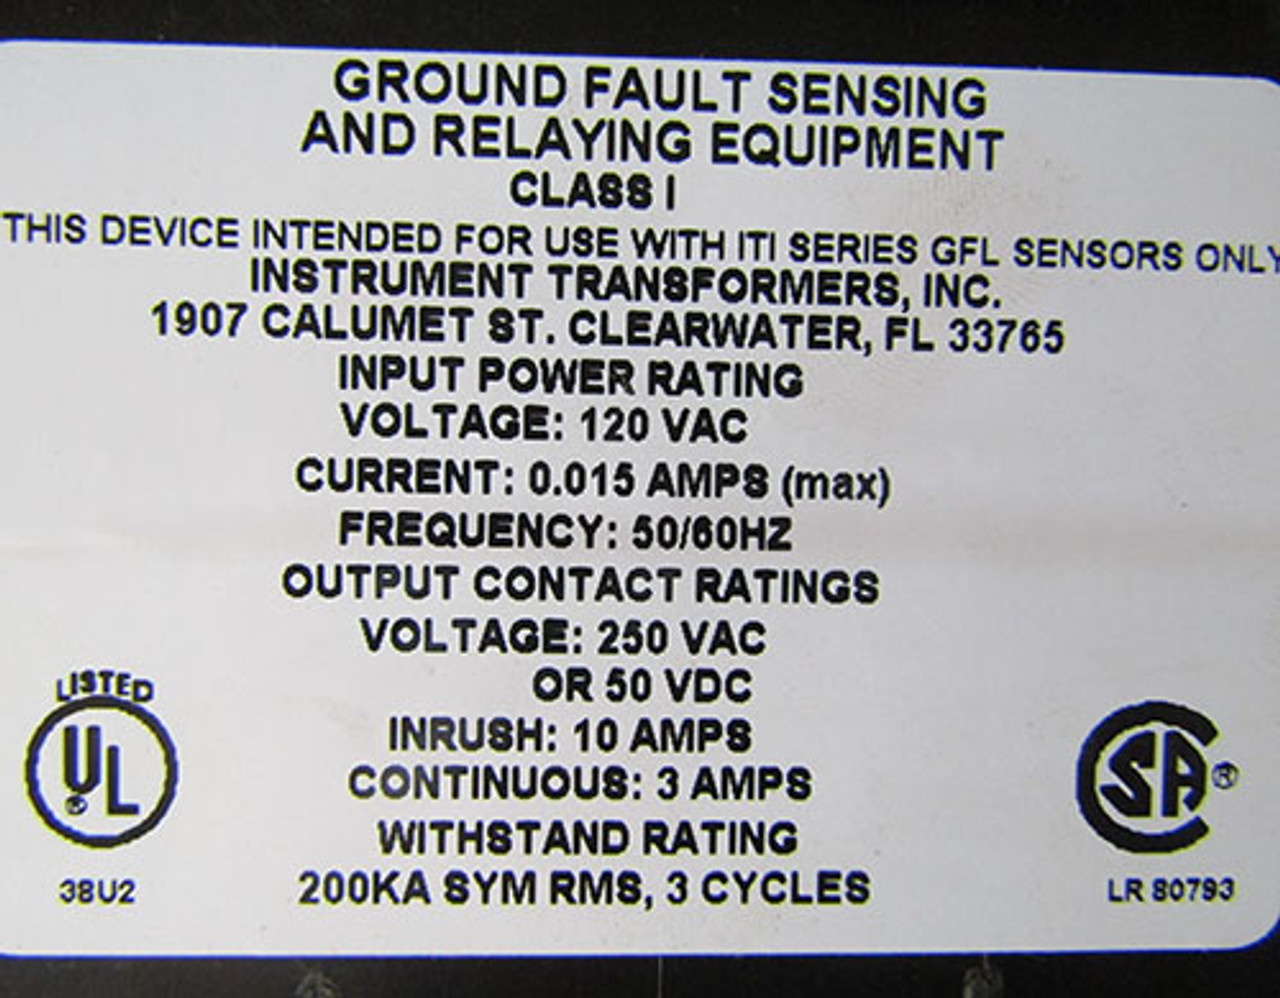 ITI BGFL157-60 Ground Fault Relay 120VAC 0.015 Amps Max -  Used